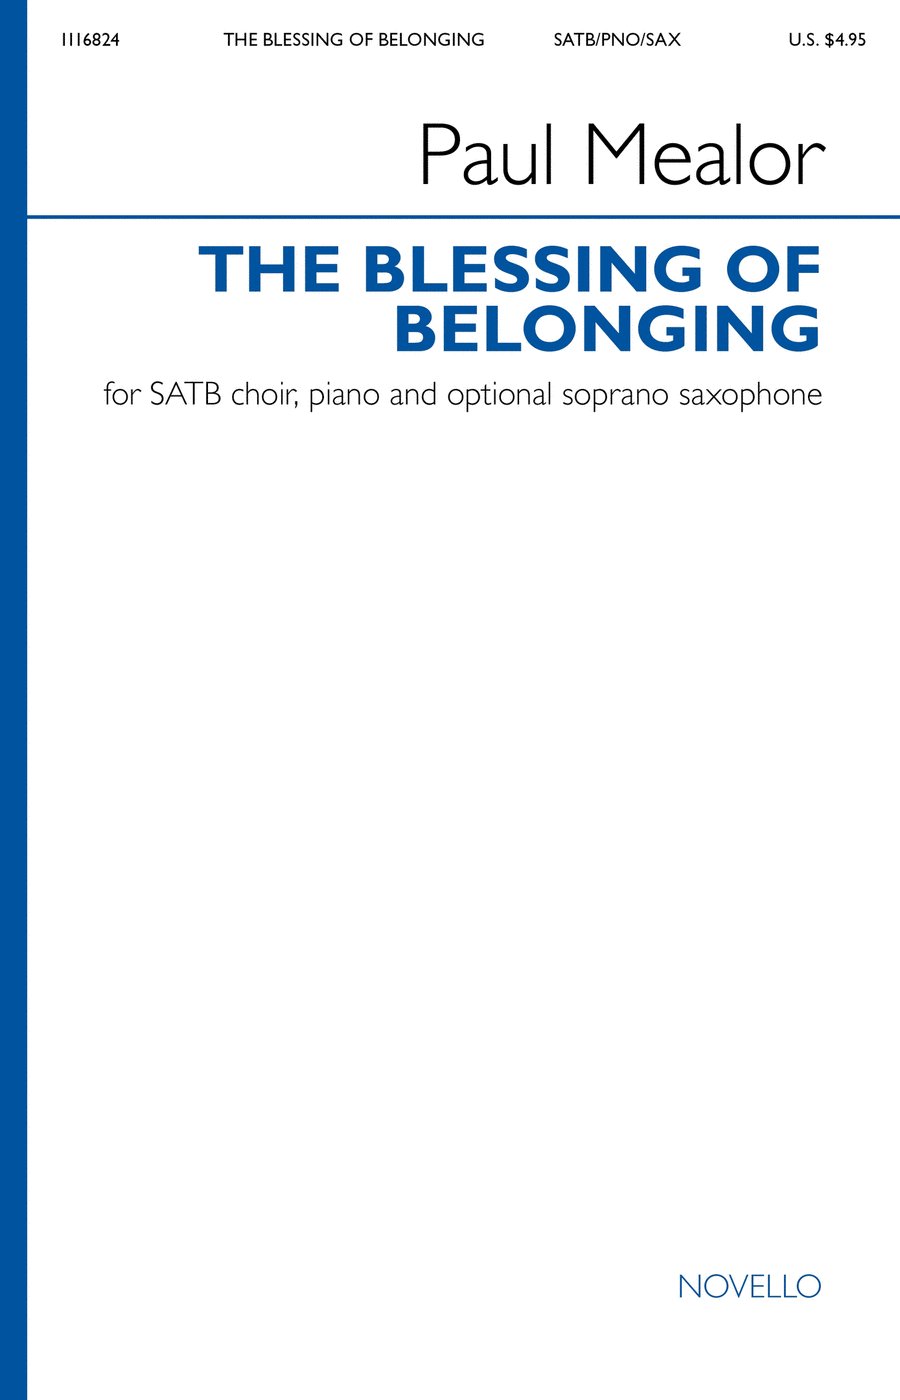 The Blessing Of Belonging (Vocal Score)